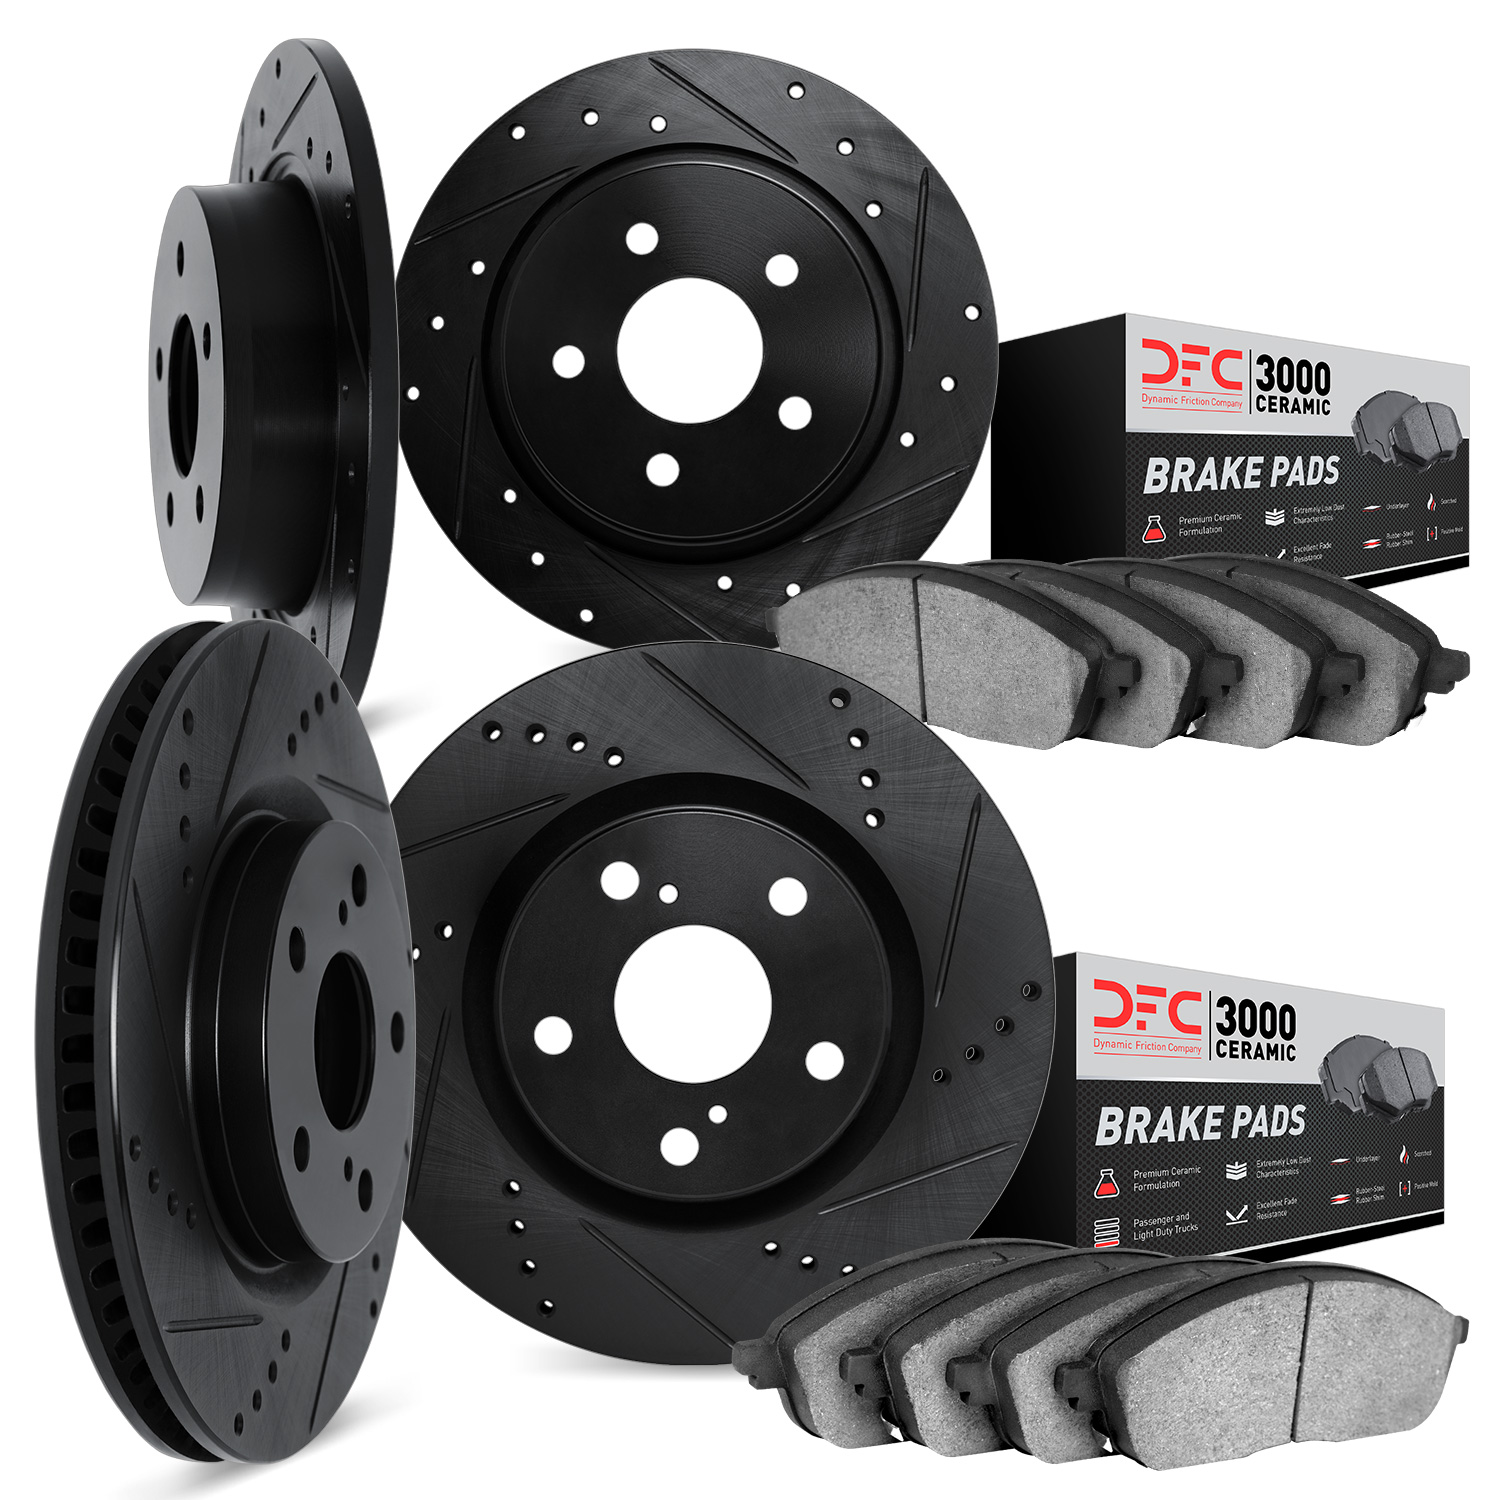 8304-13015 Drilled/Slotted Brake Rotors with 3000-Series Ceramic Brake Pads Kit [Black], 1997-1999 Subaru, Position: Front and R